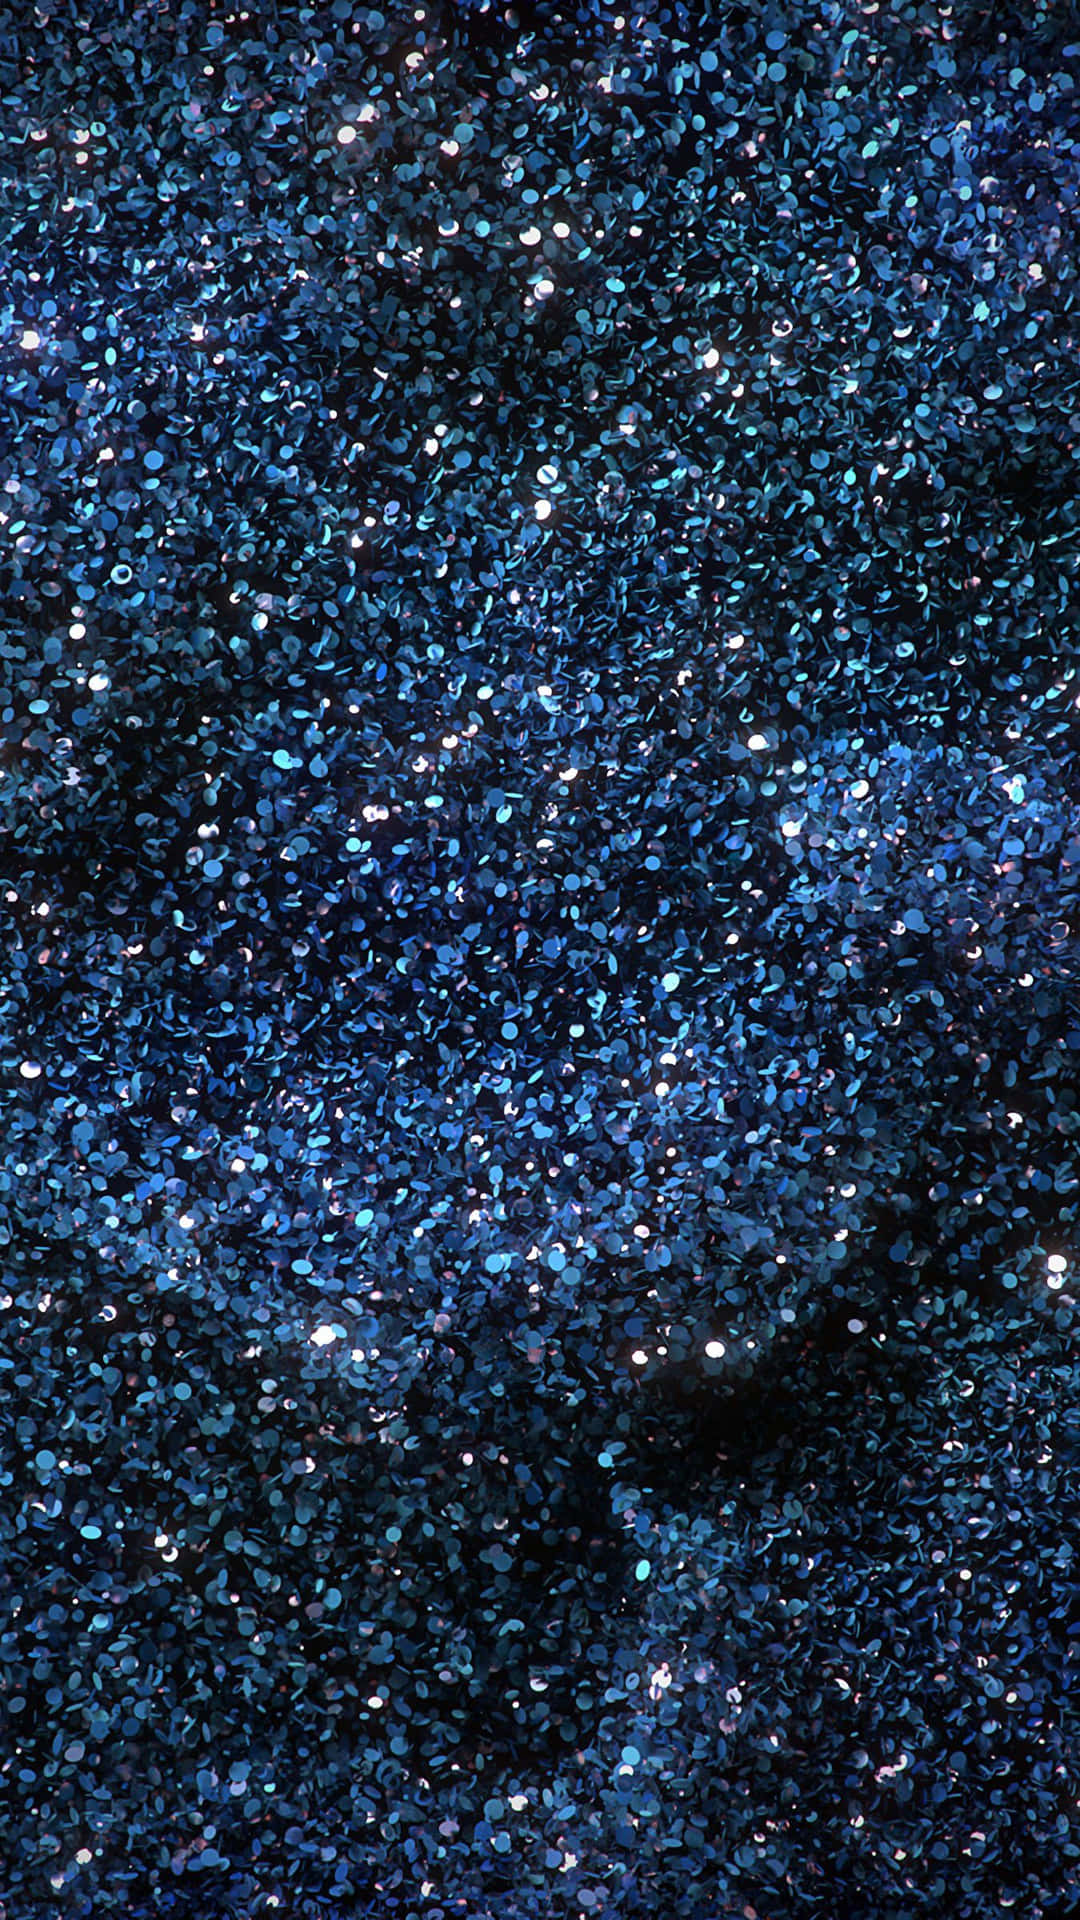 Cosmic-Like Sparkly Blue Background